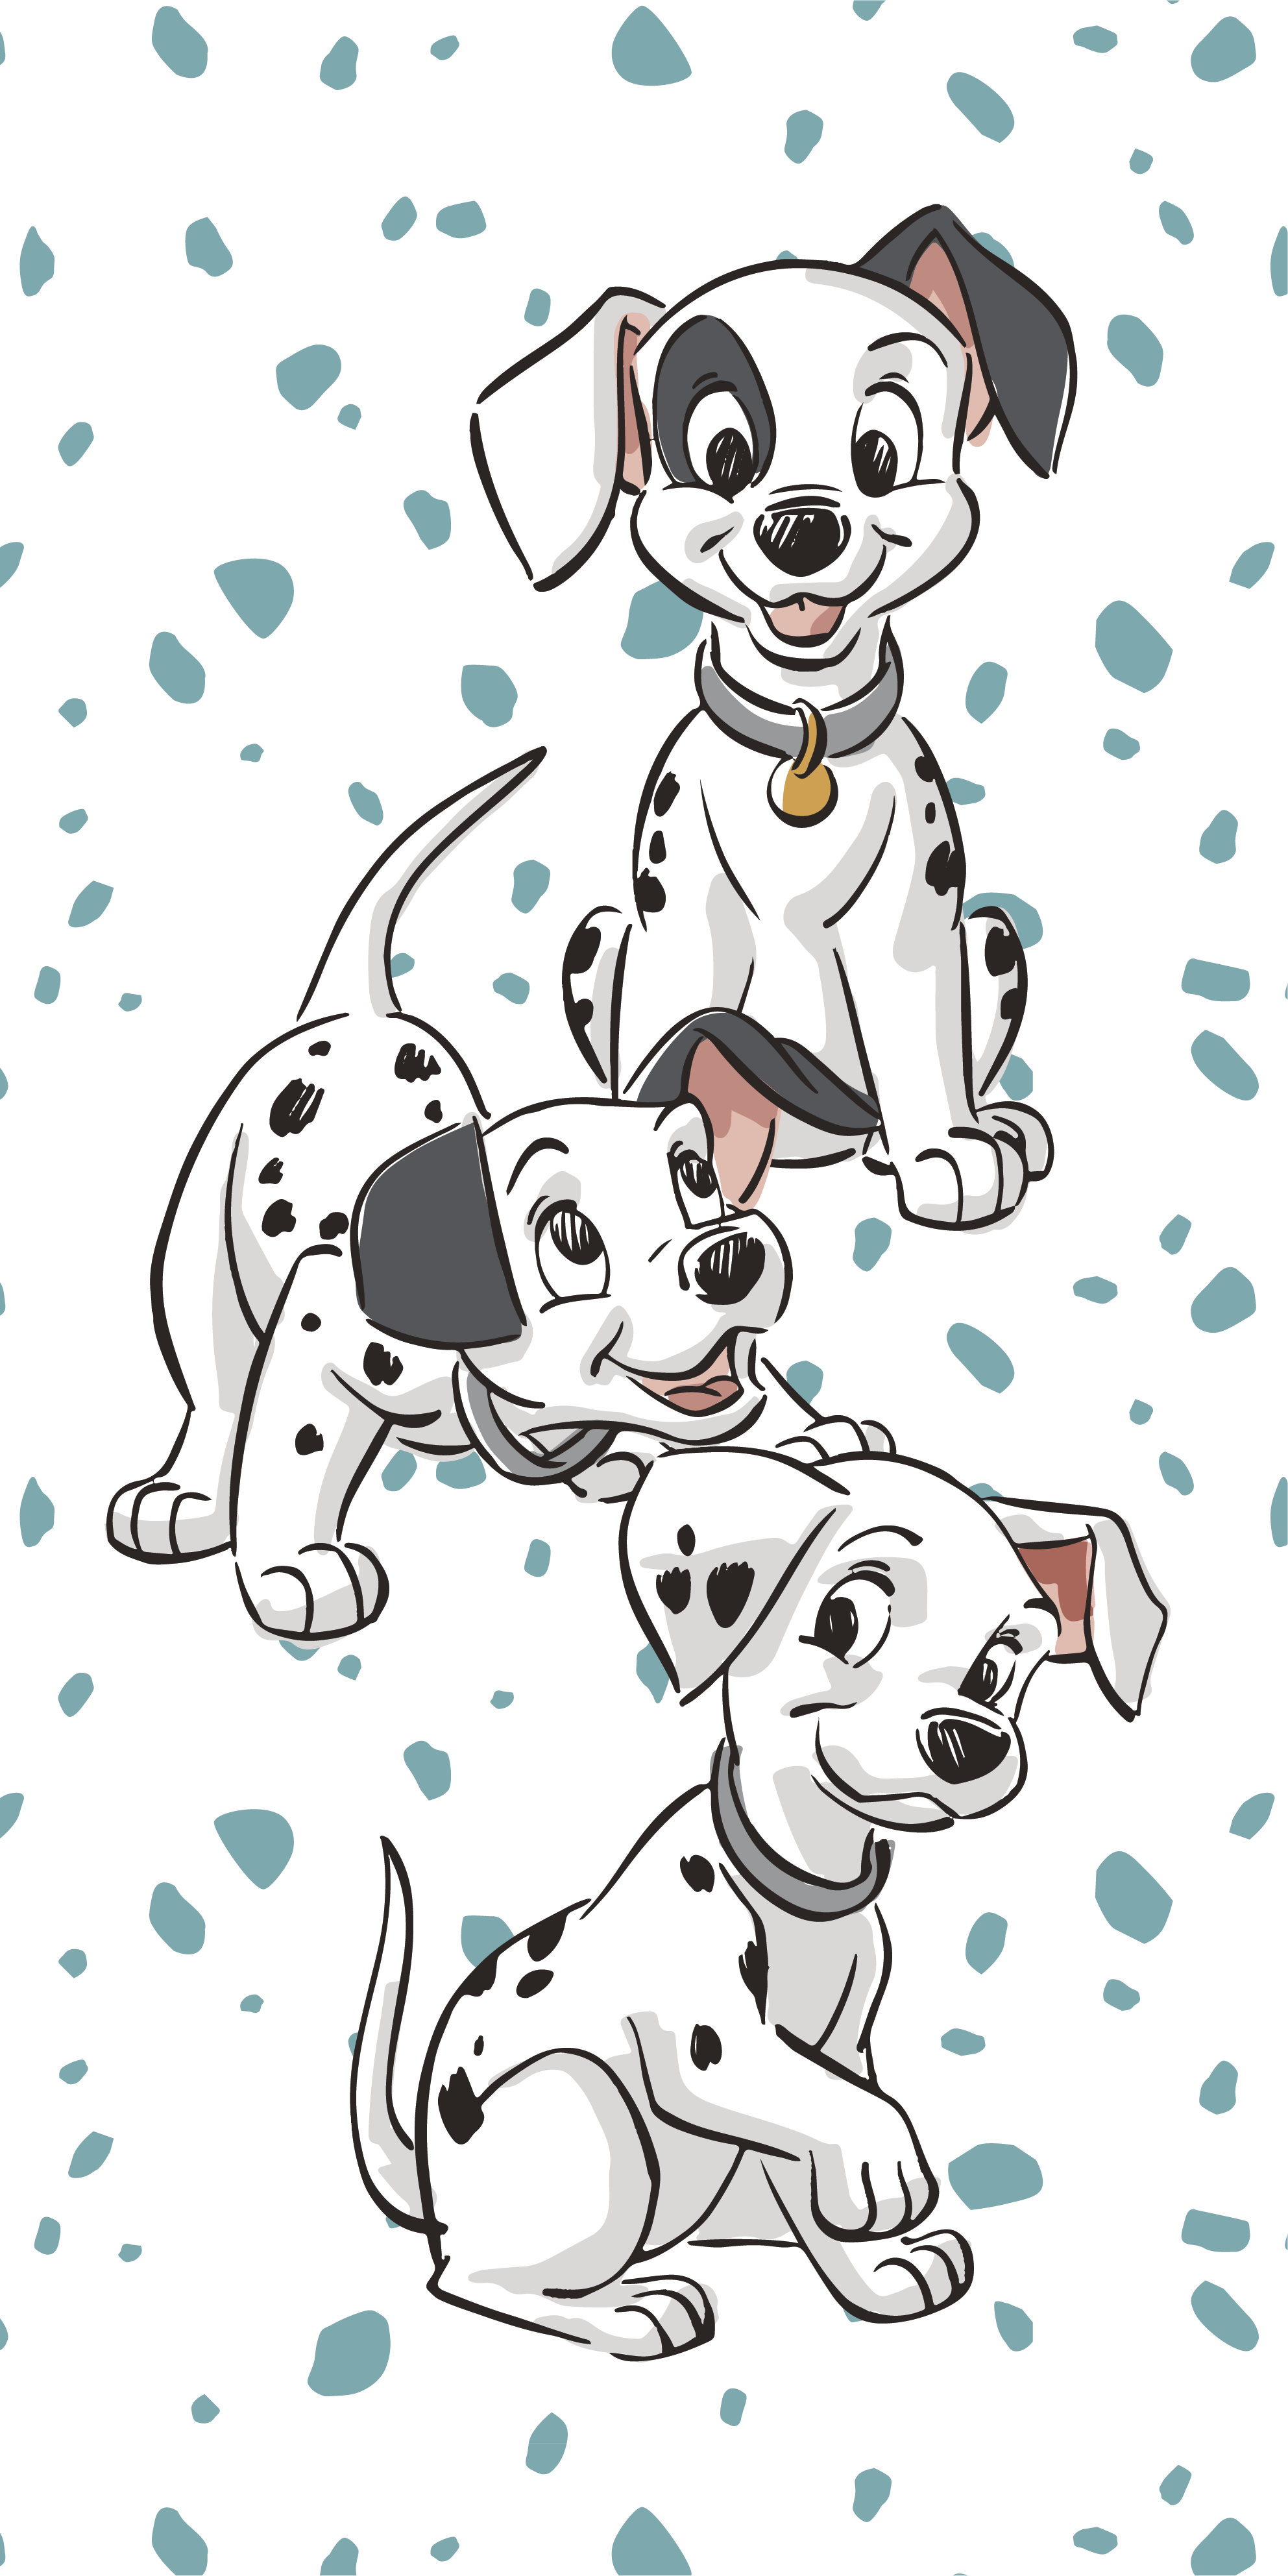 101 Dalmatians Fabric Wallpaper and Home Decor  Spoonflower